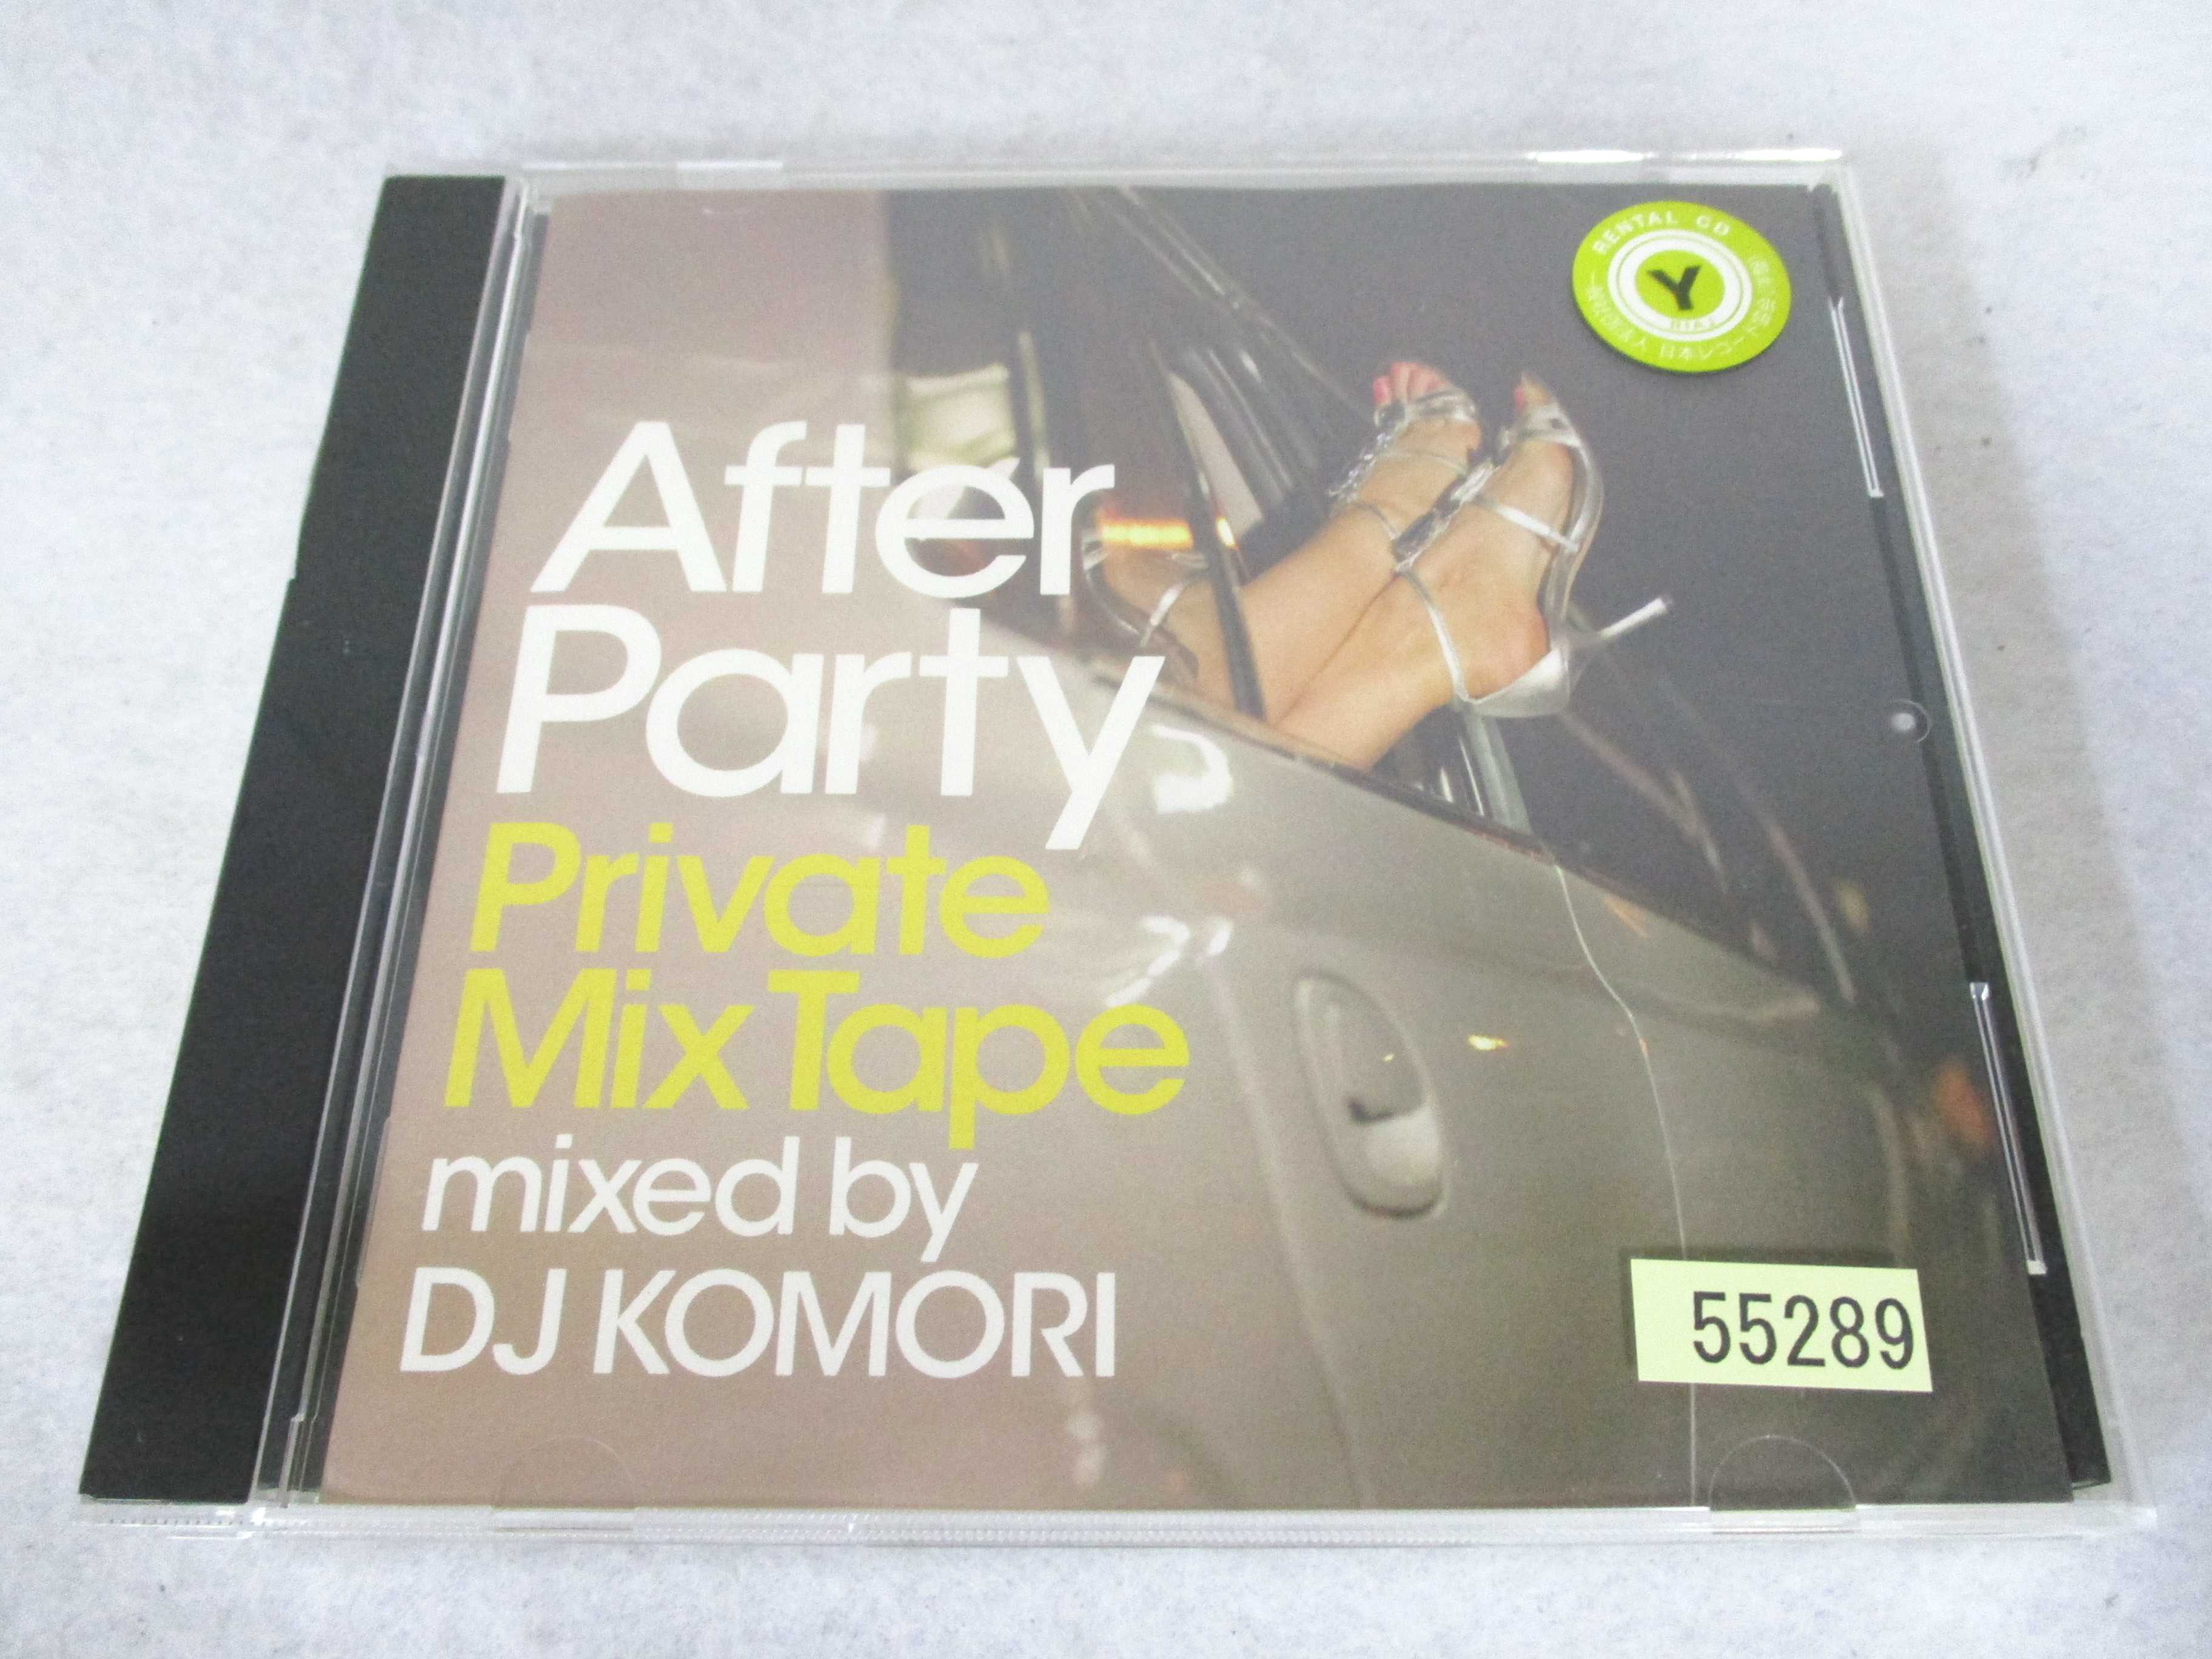 AC01323 【中古】 【CD】 After Party Private Mix Tape mixed by DJ KOMORI/SWEETEST DUB STORE 他